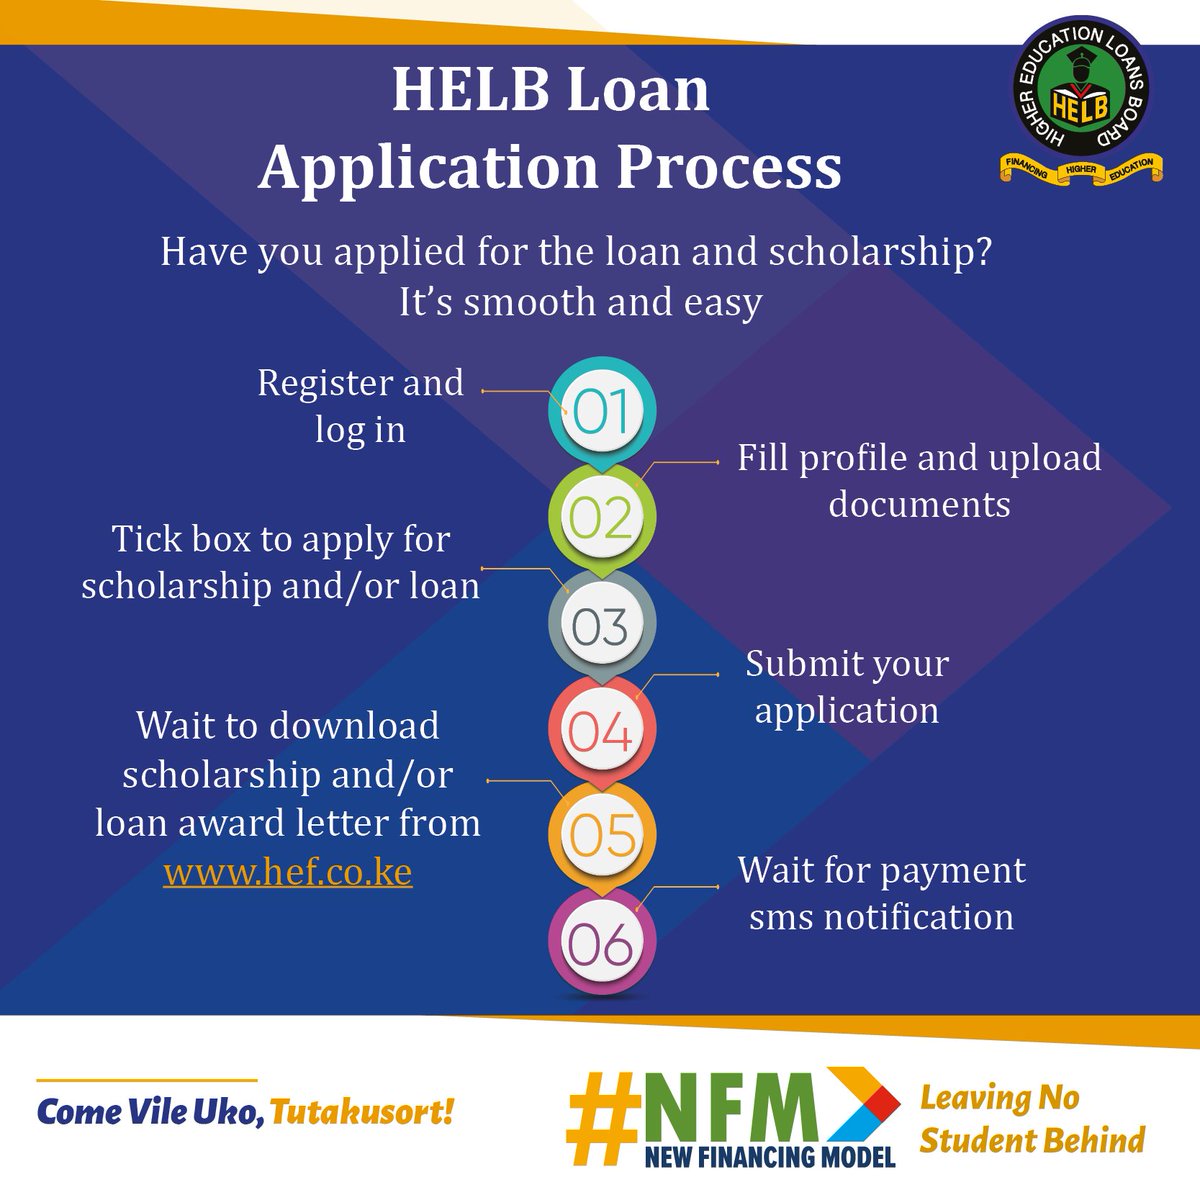 Do not be conned, there are no charges to facilitate an application for government Loan and Scholarship. Simply log onto hef.co.ke, to make your application. Spread the word!